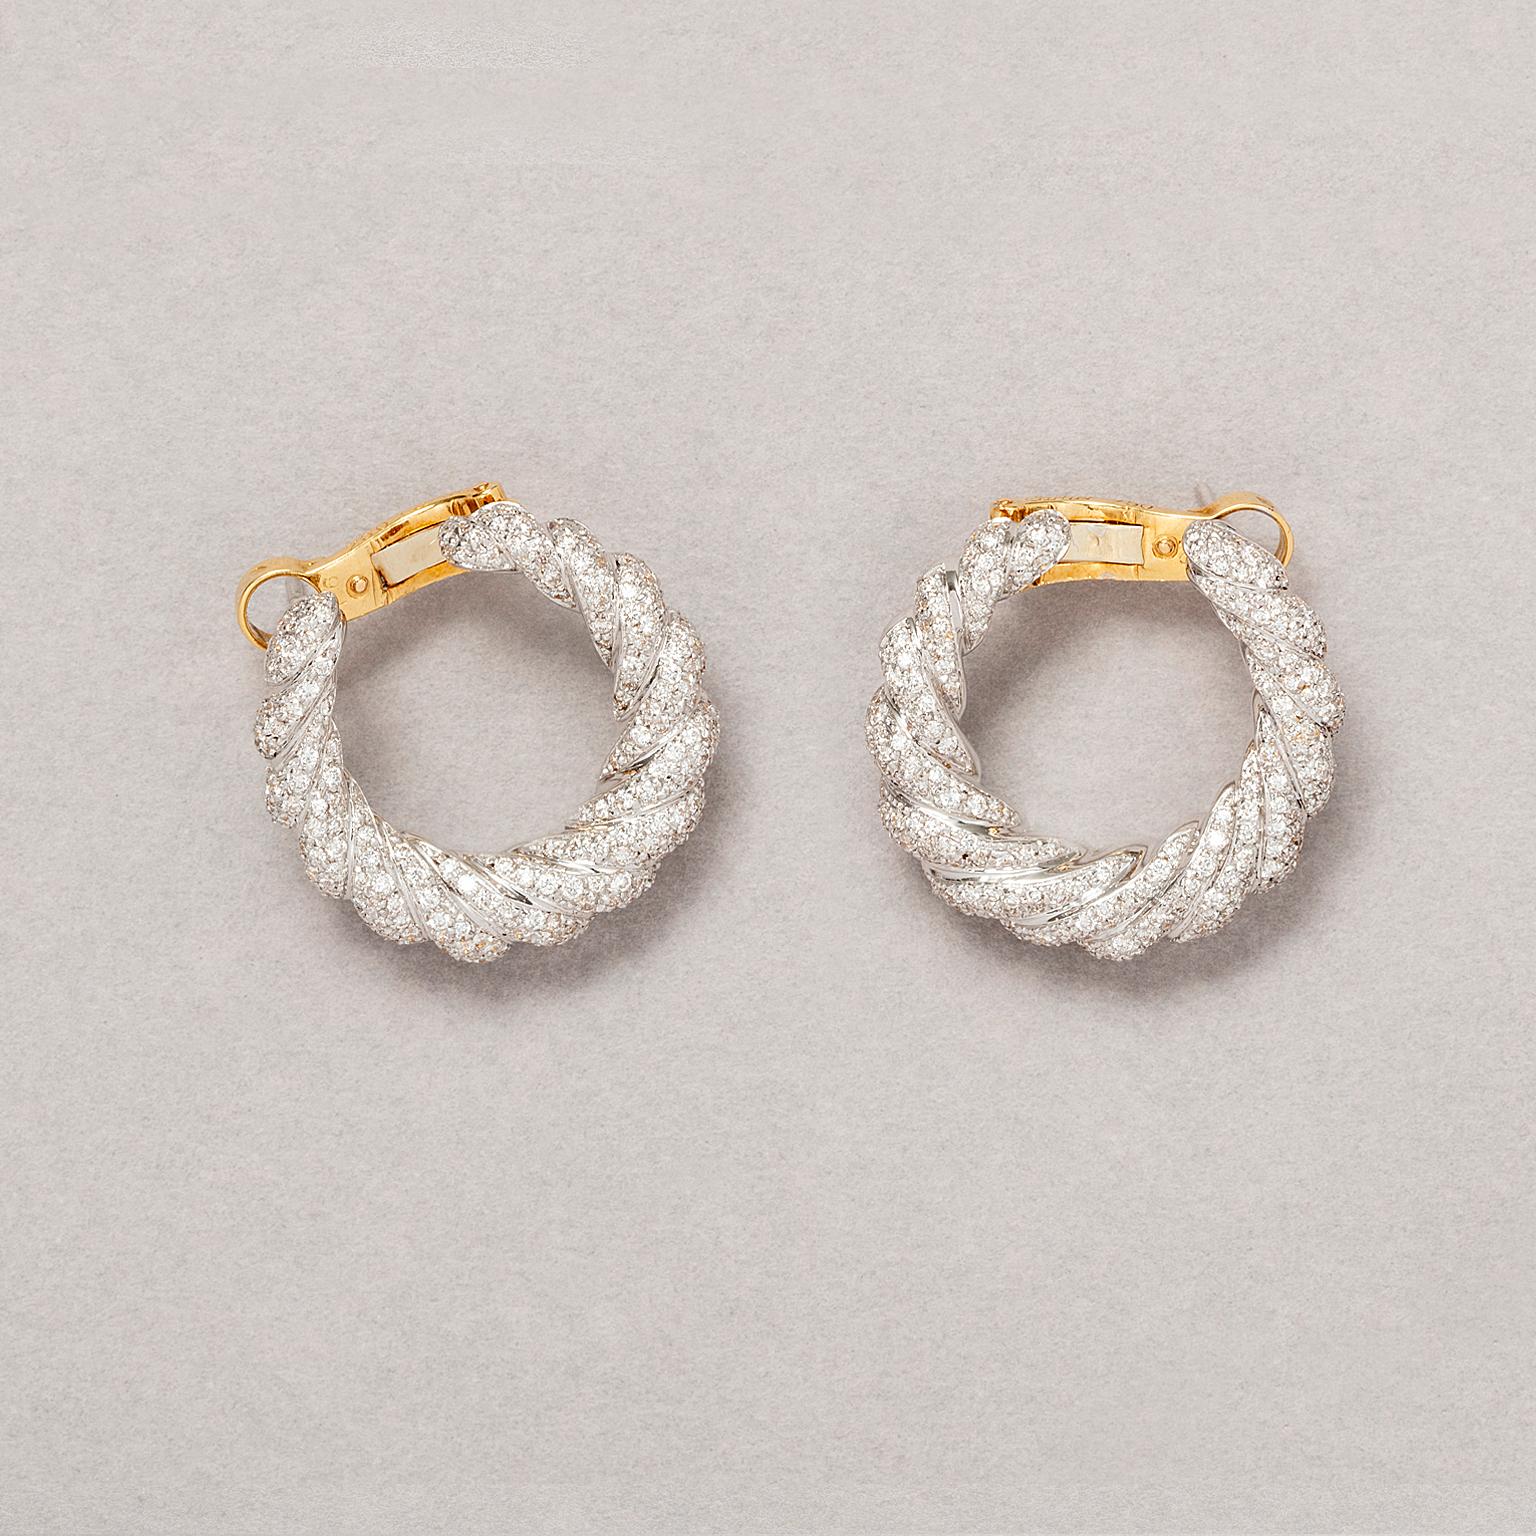 A pair of 18 carat white and yellow gold earrings, garland like hoops, twisted white gold set with 430 brilliant cut diamonds (in total app. 2.5 carat G-H, Si). Signed and numbered: Cartier, 608592, with the original box.

weight: 16.10